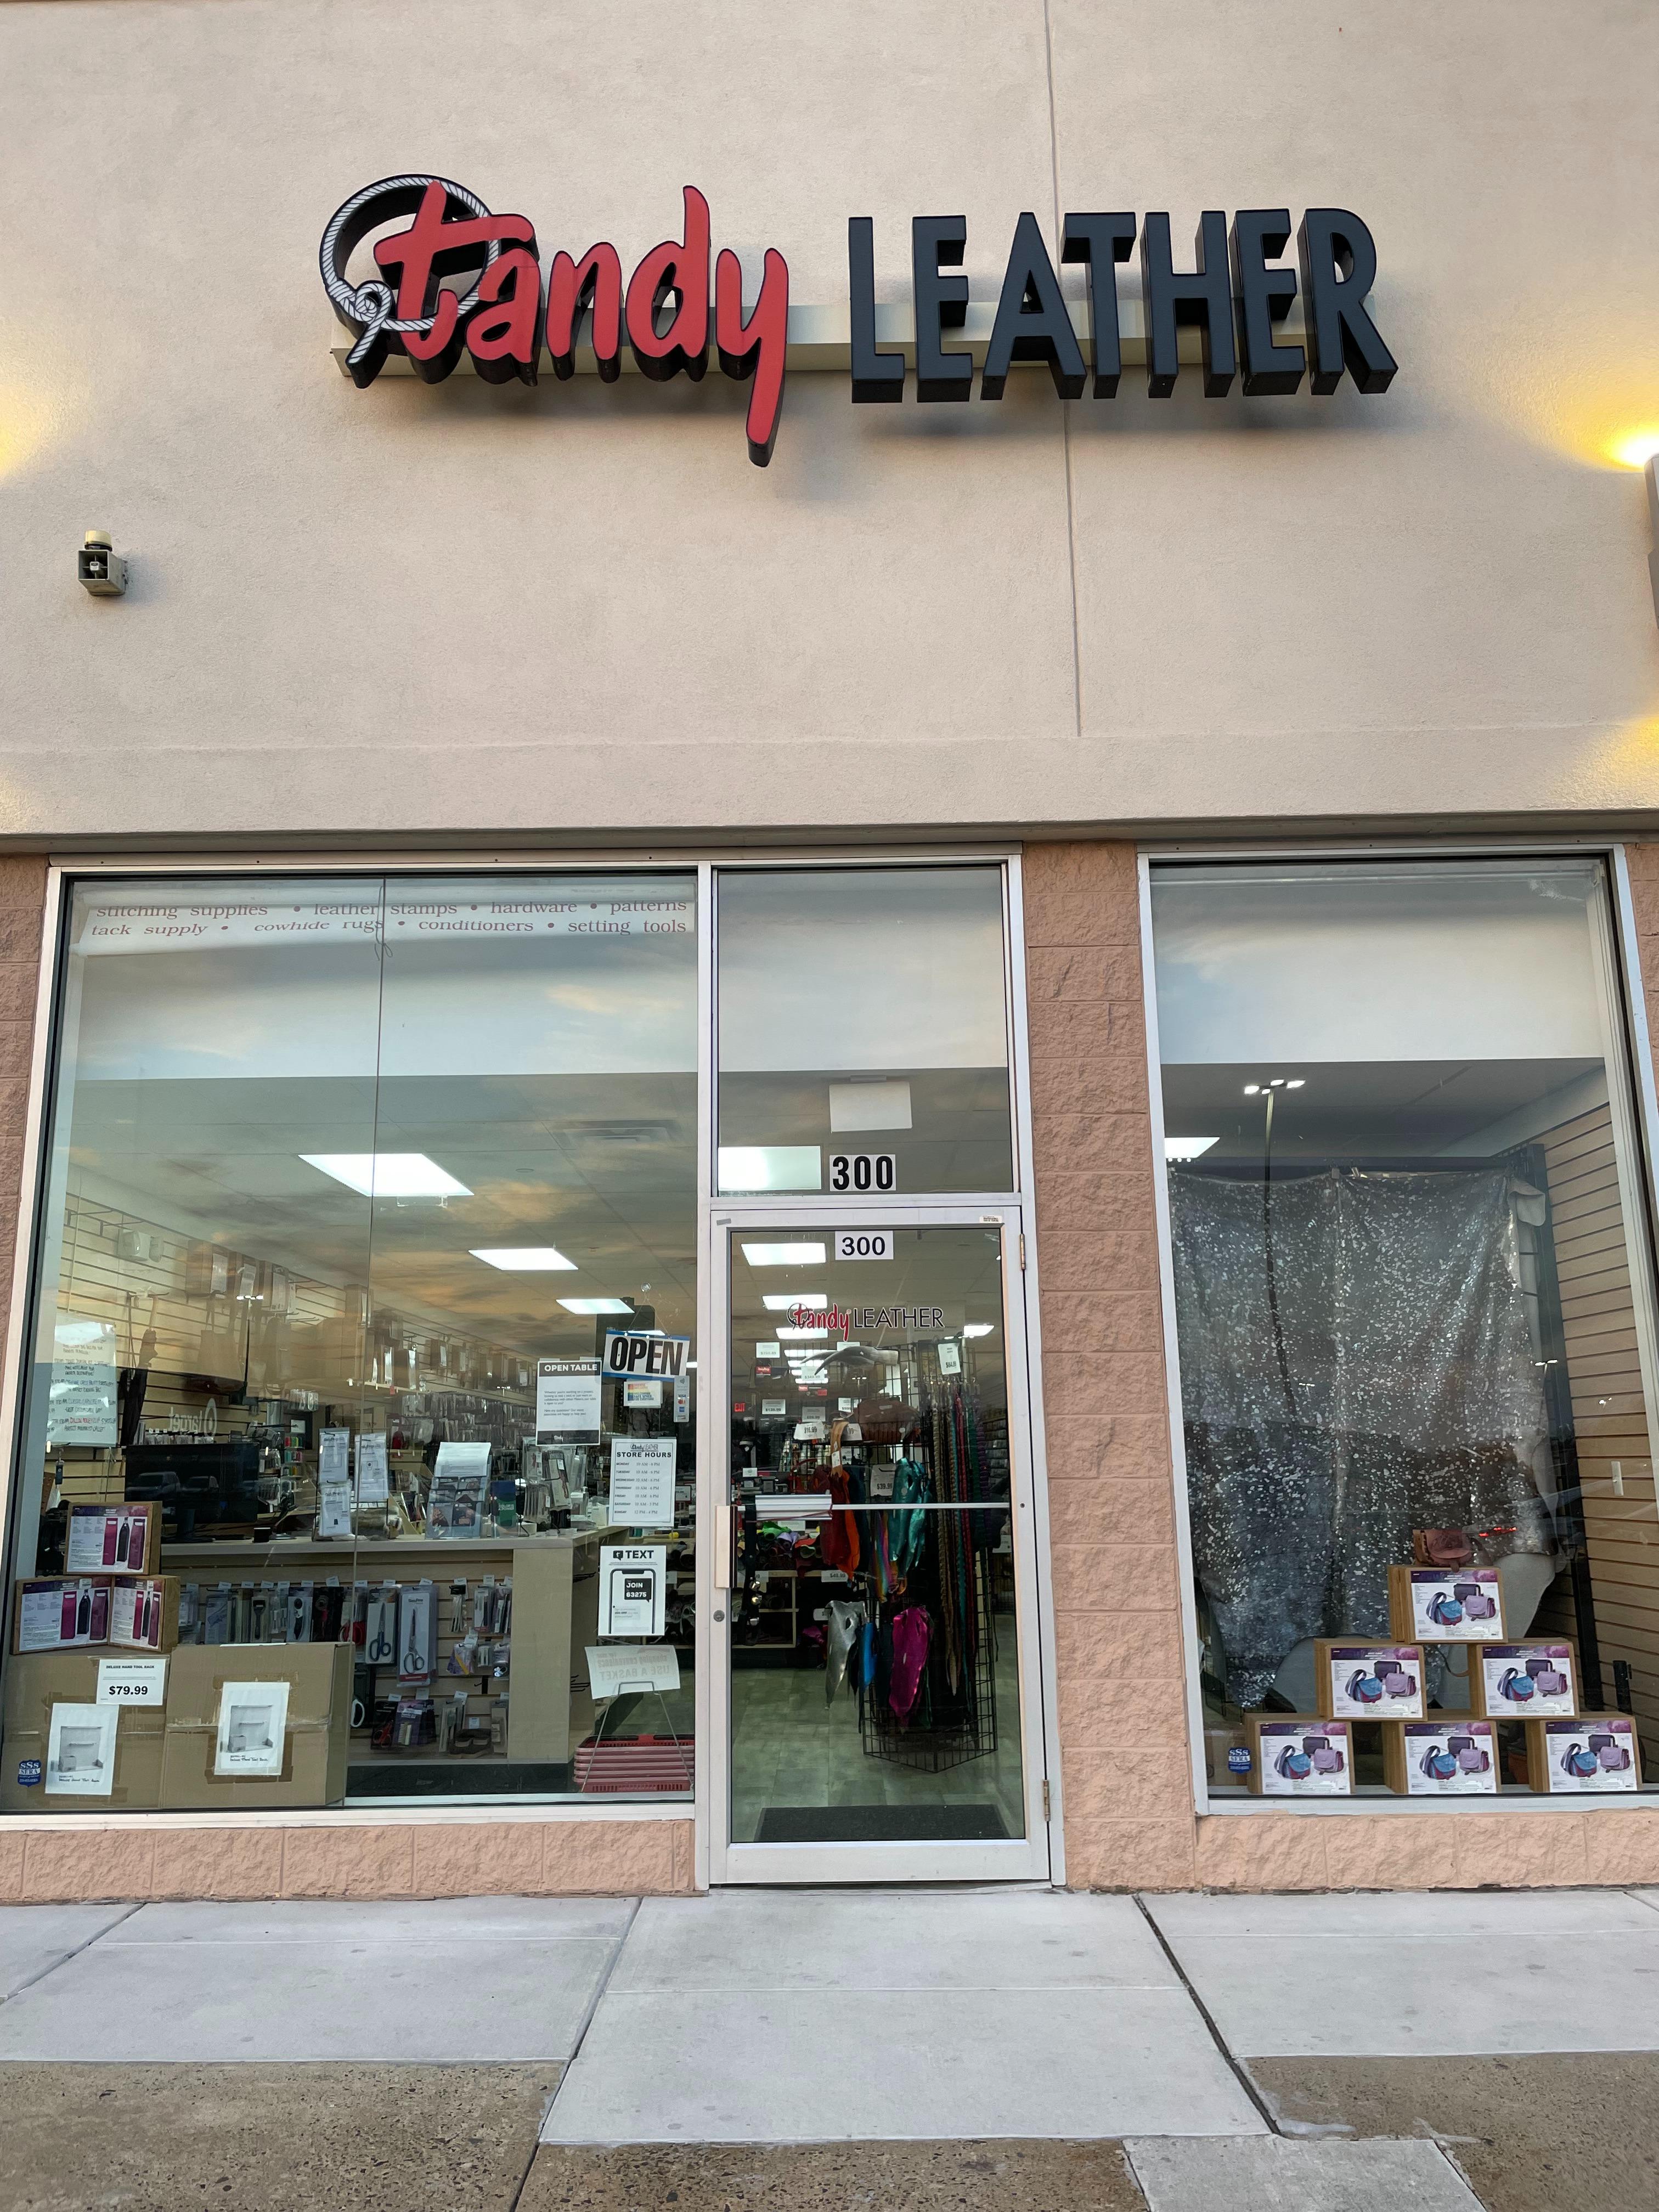 Get a Leather Craft Education: Tandy Leather